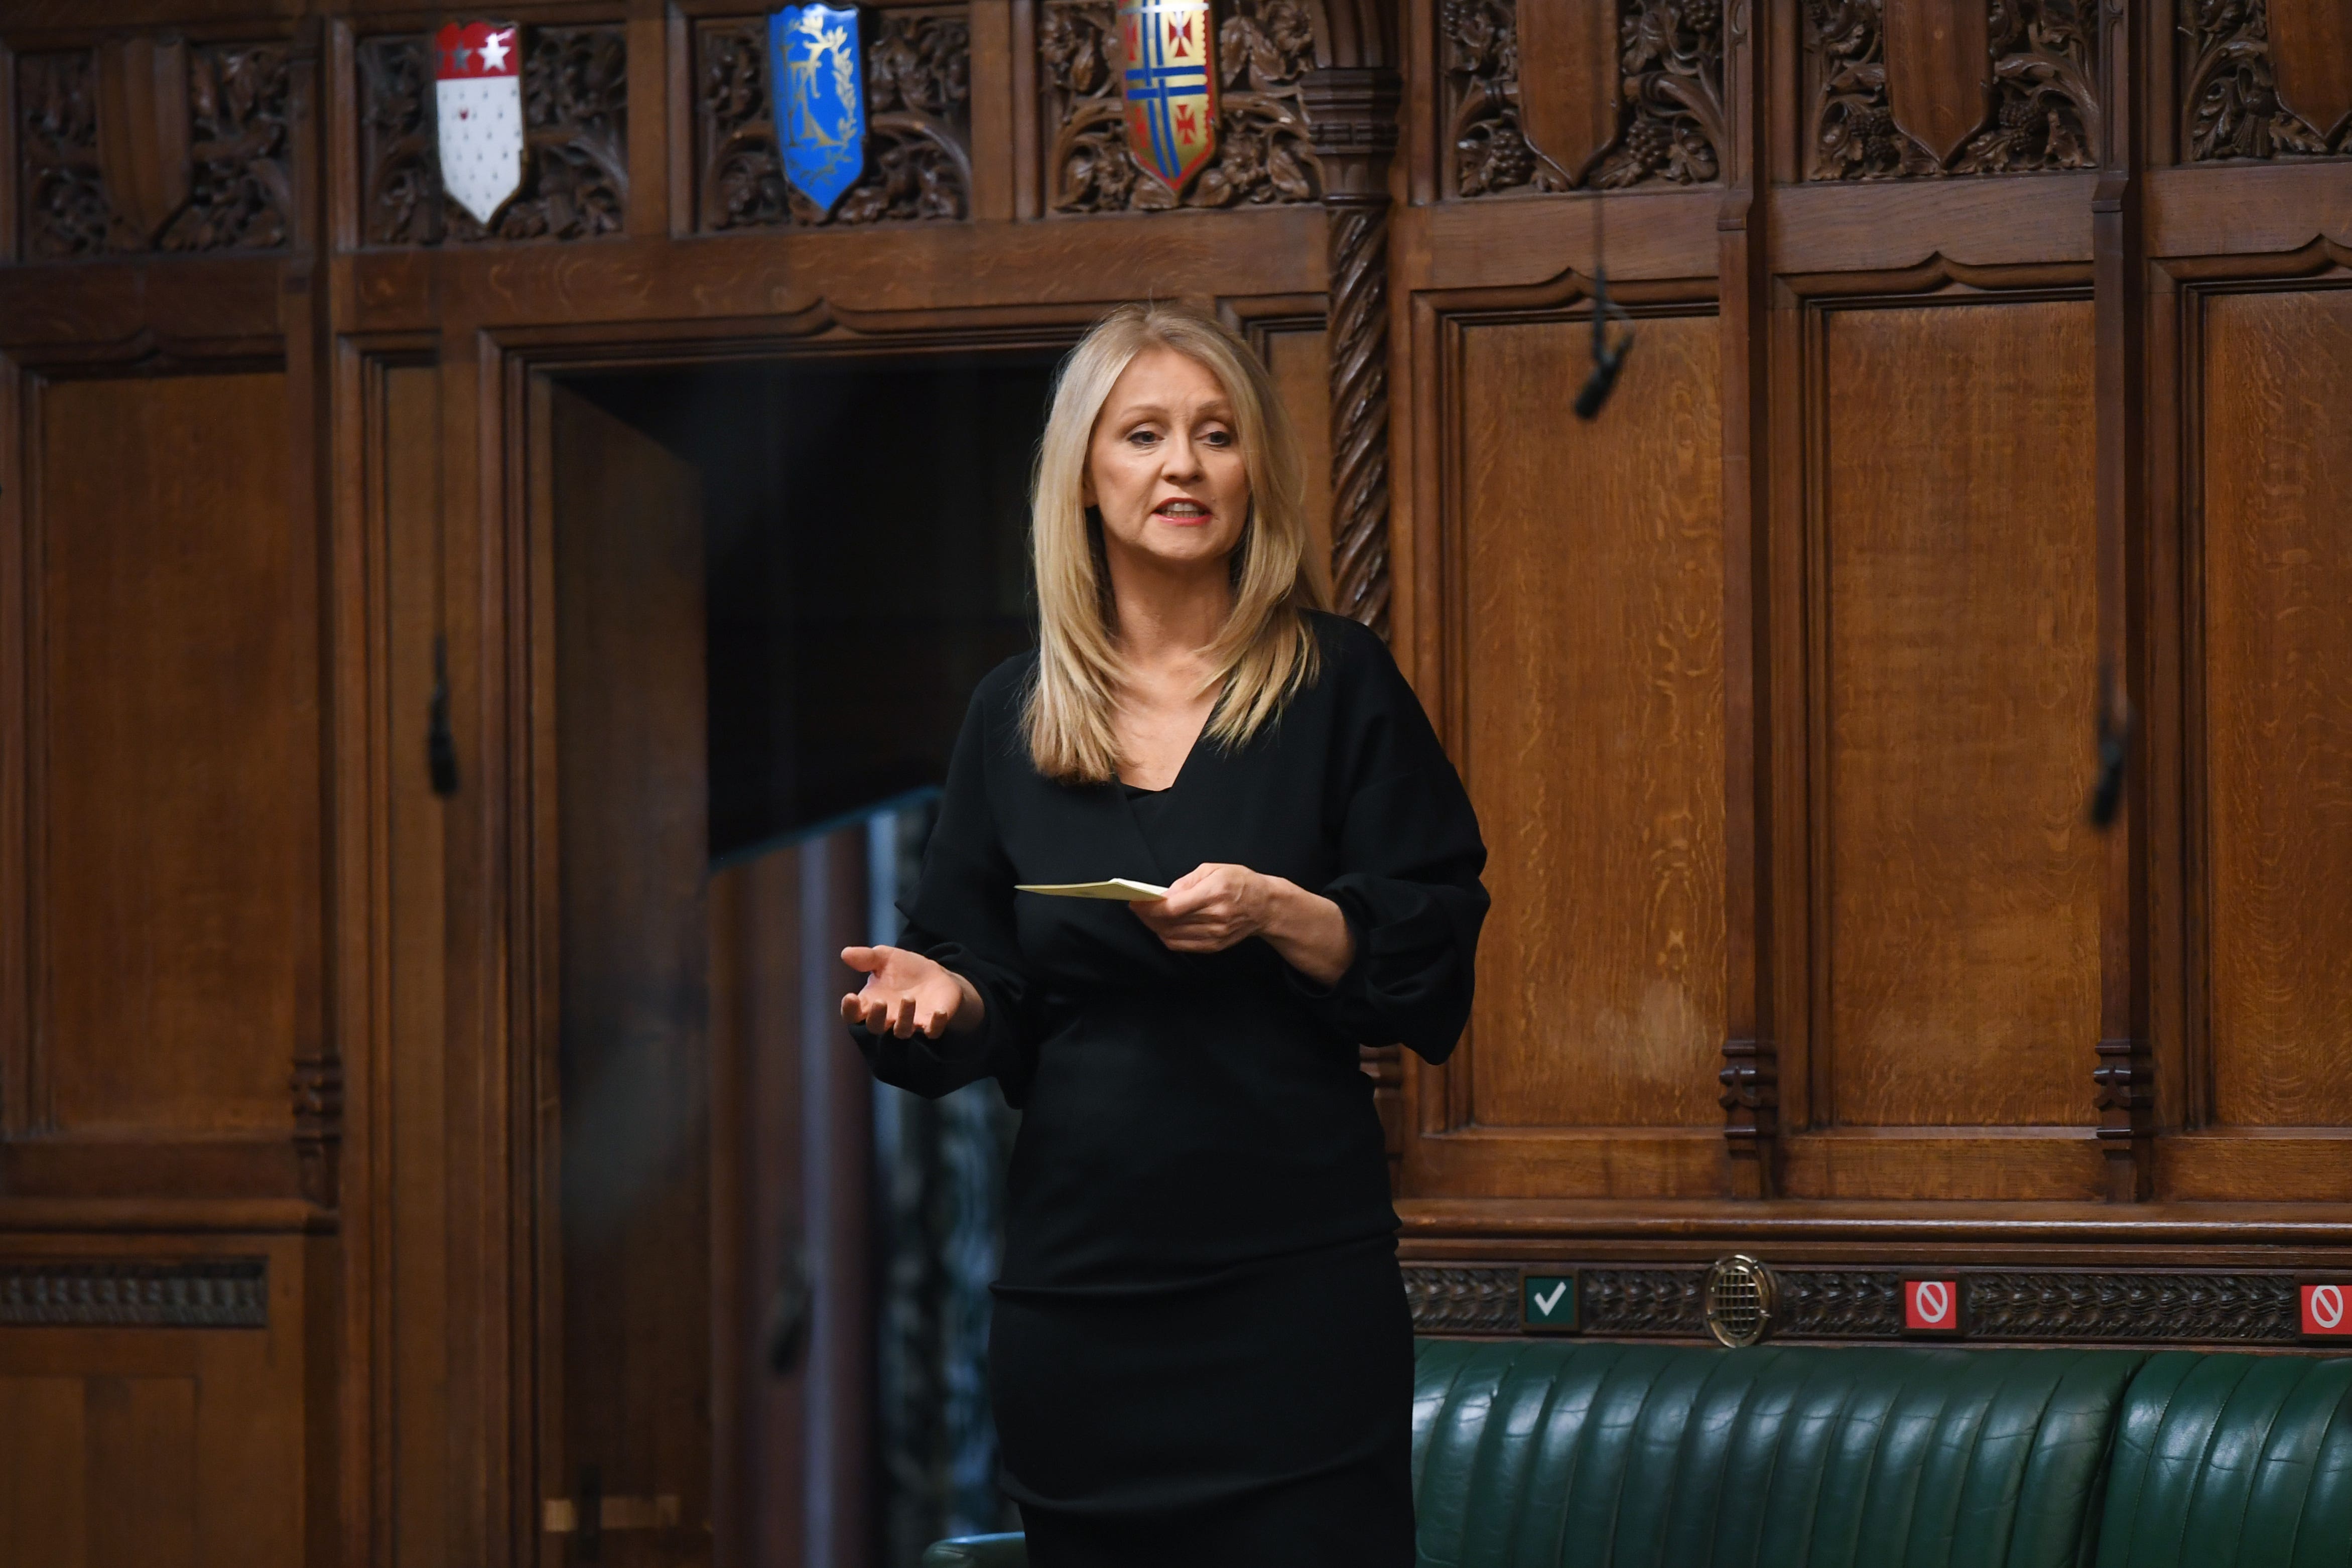 It was only as the session was drawing to a close that Esther McVey, the Tory backbencher, was called to ask a question